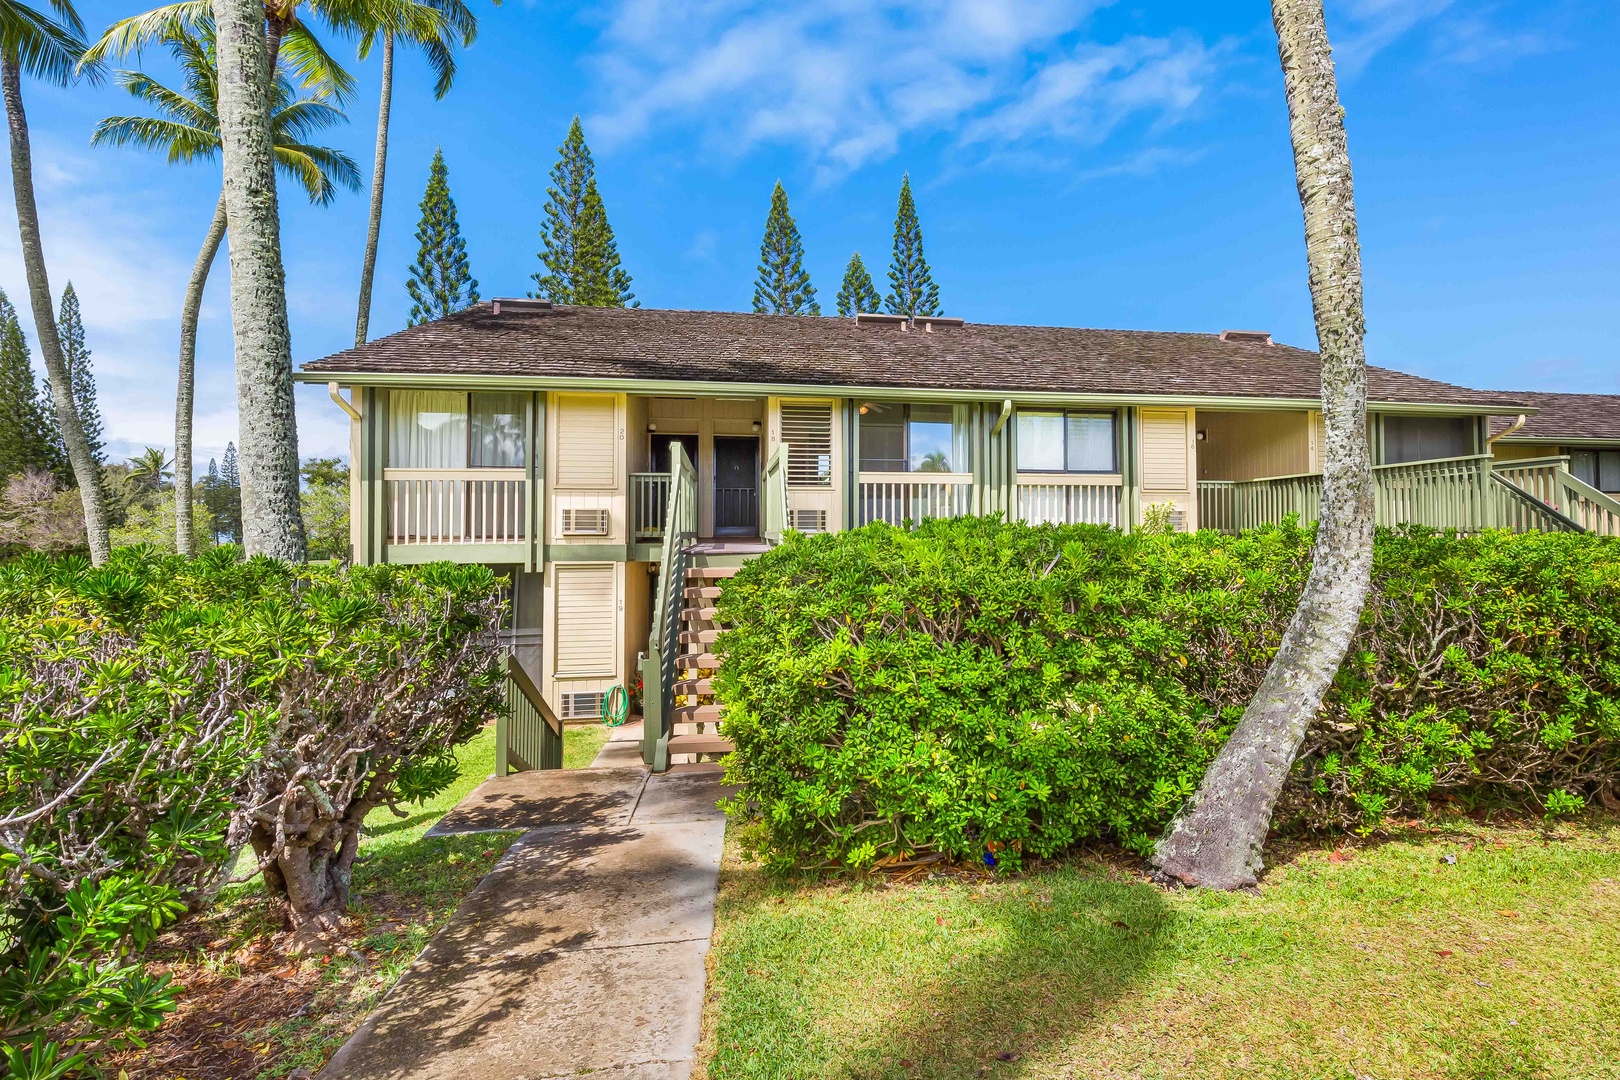 Kahuku Vacation Rentals, Ilima West Kuilima Estates #18 at Turtle Bay - Step into warmth and comfort in our inviting sanctuary, a perfect setting for unforgettable memories.